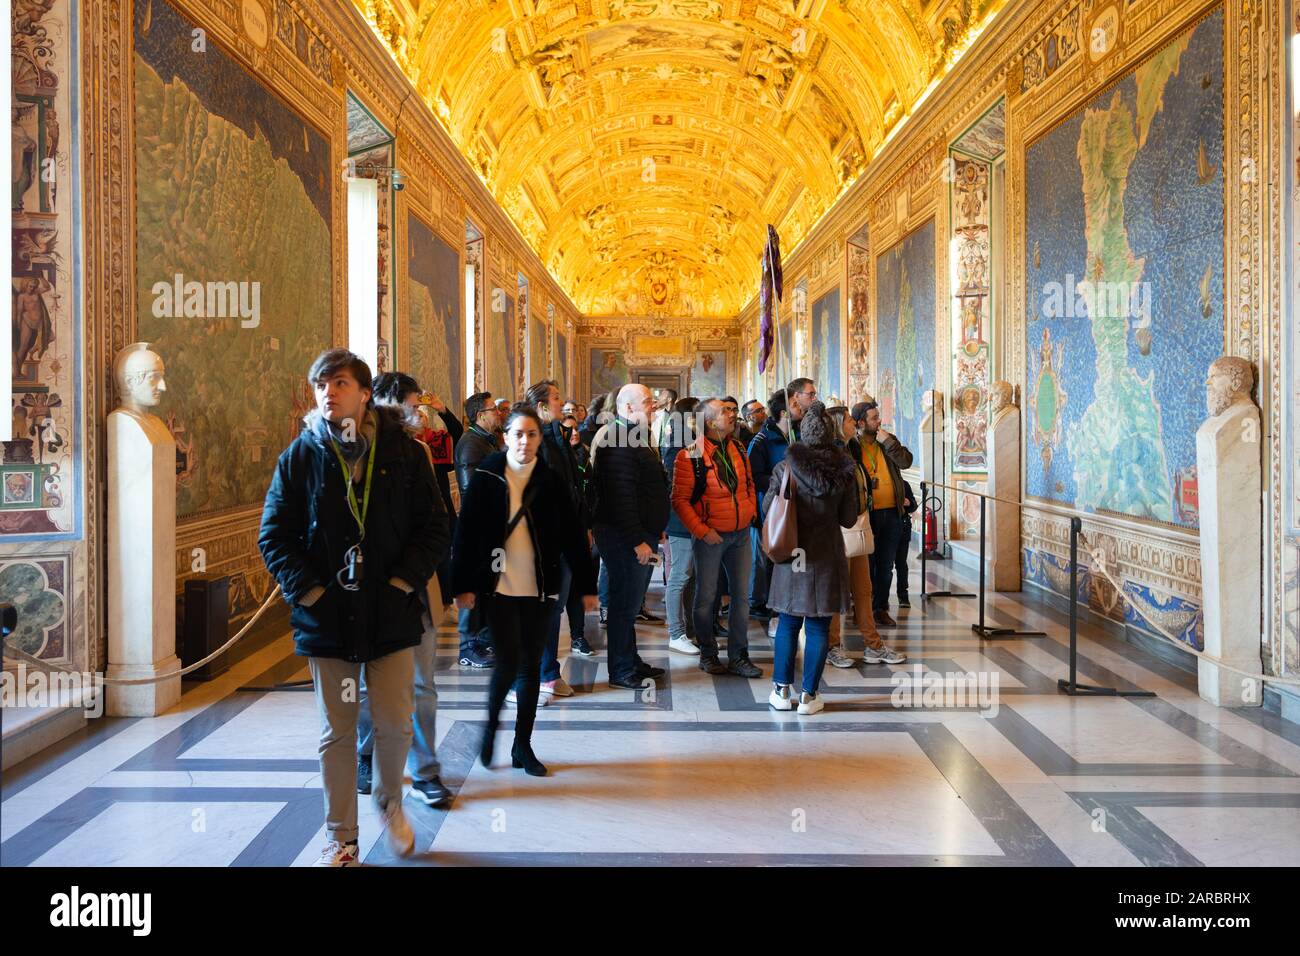 Rome, Italy - Jan 3, 2020: Wall and ceiling paintings in the Gallery of Maps with tourists wandering around at the Vatican Museum, Vatican City, Rome Stock Photo